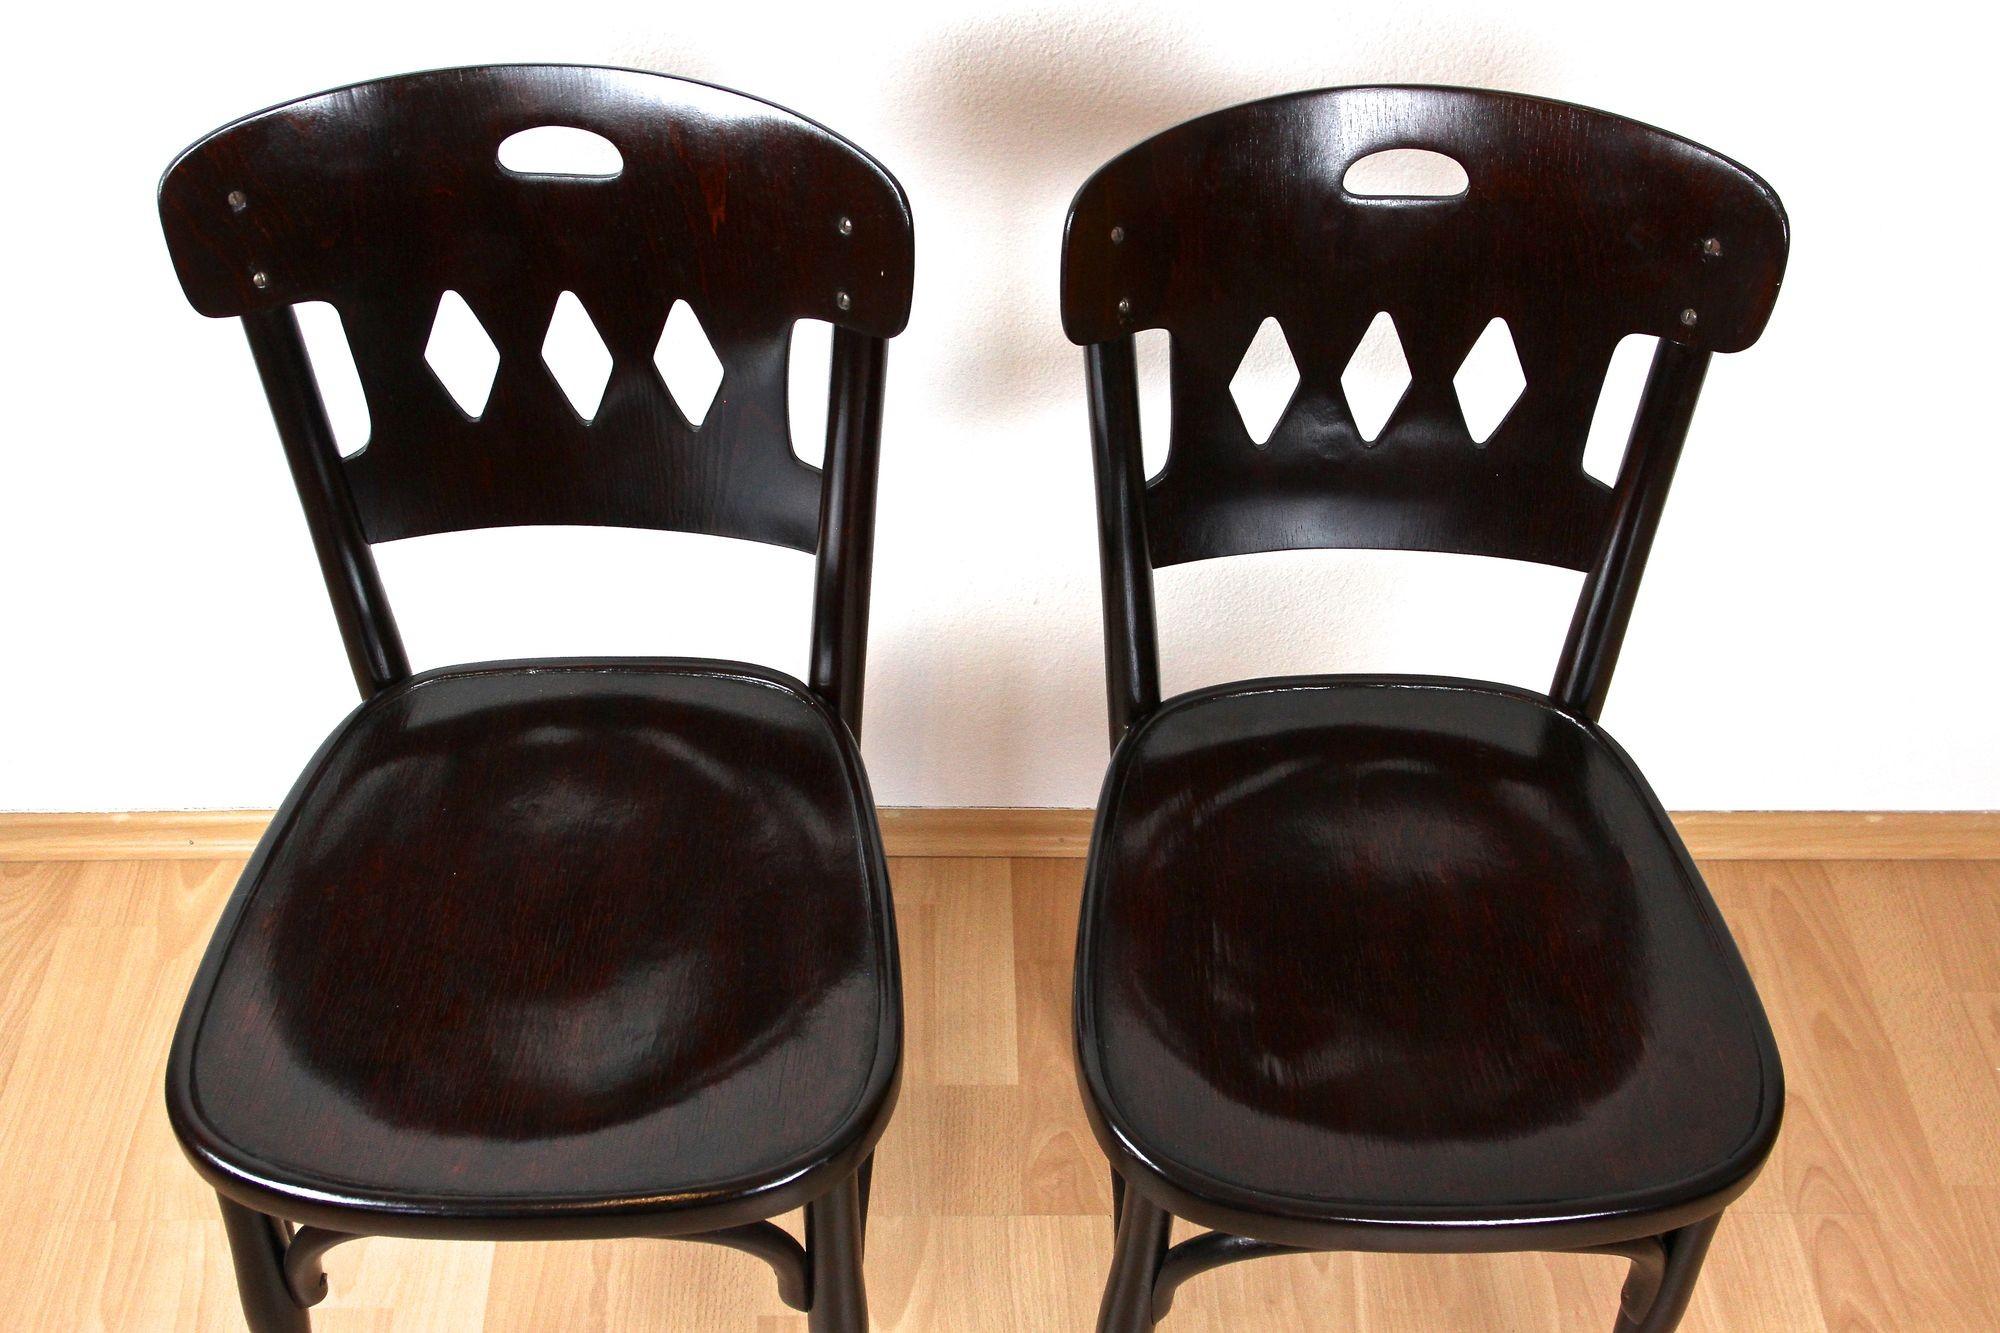 Lovely pair of Art Nouveau bentwood chairs made by the renowned company of Jacob & Josef Kohn in Vienna/ Austria in the period around 1910. These beautiful chairs from the early 20th century period were made out of fine bentwood (beechwood that has